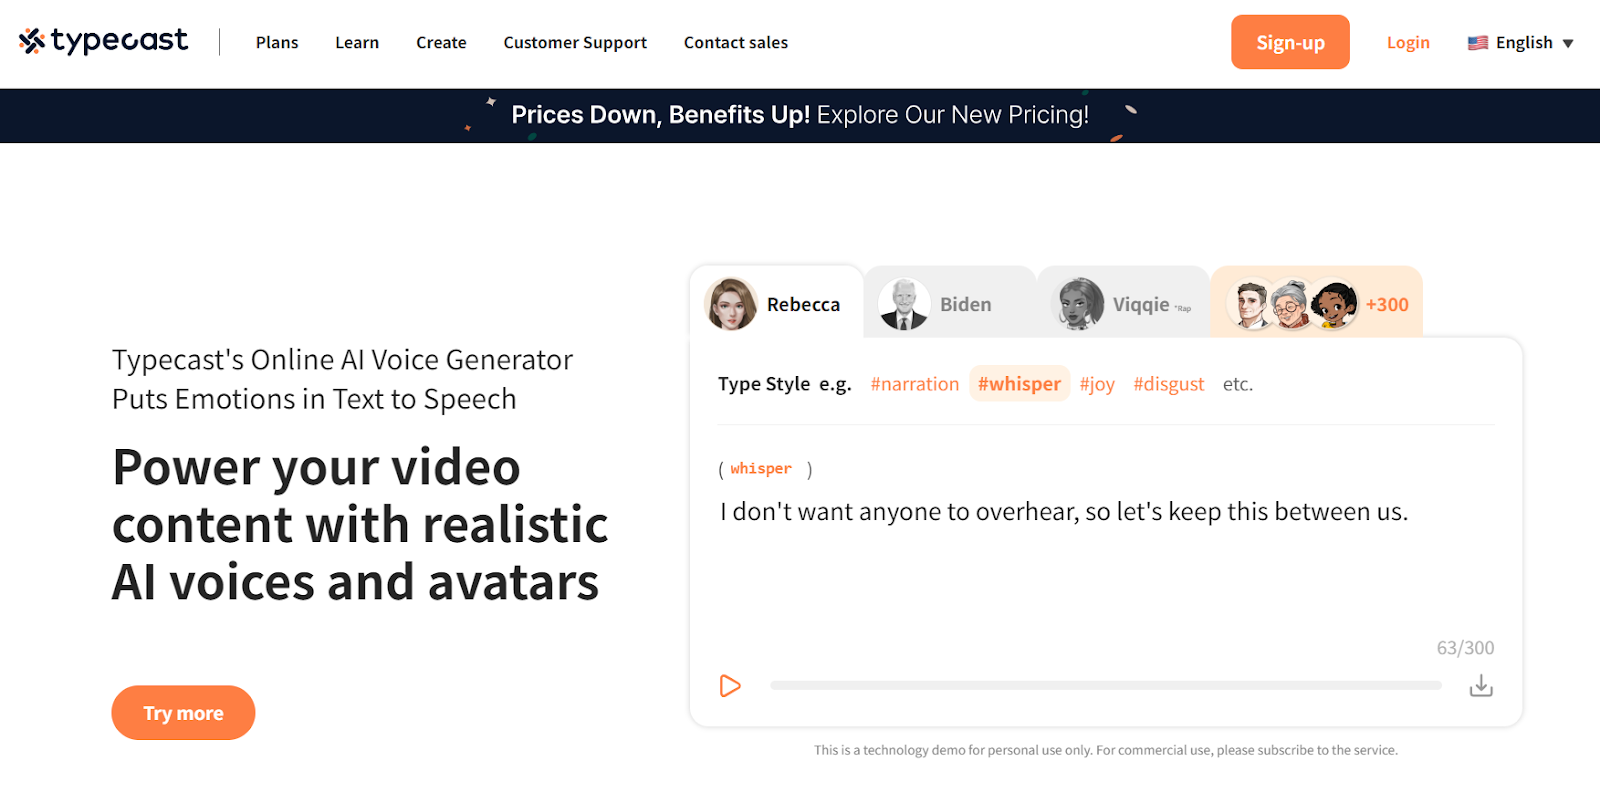 typecast website - ai voice generator with emotional text to speech